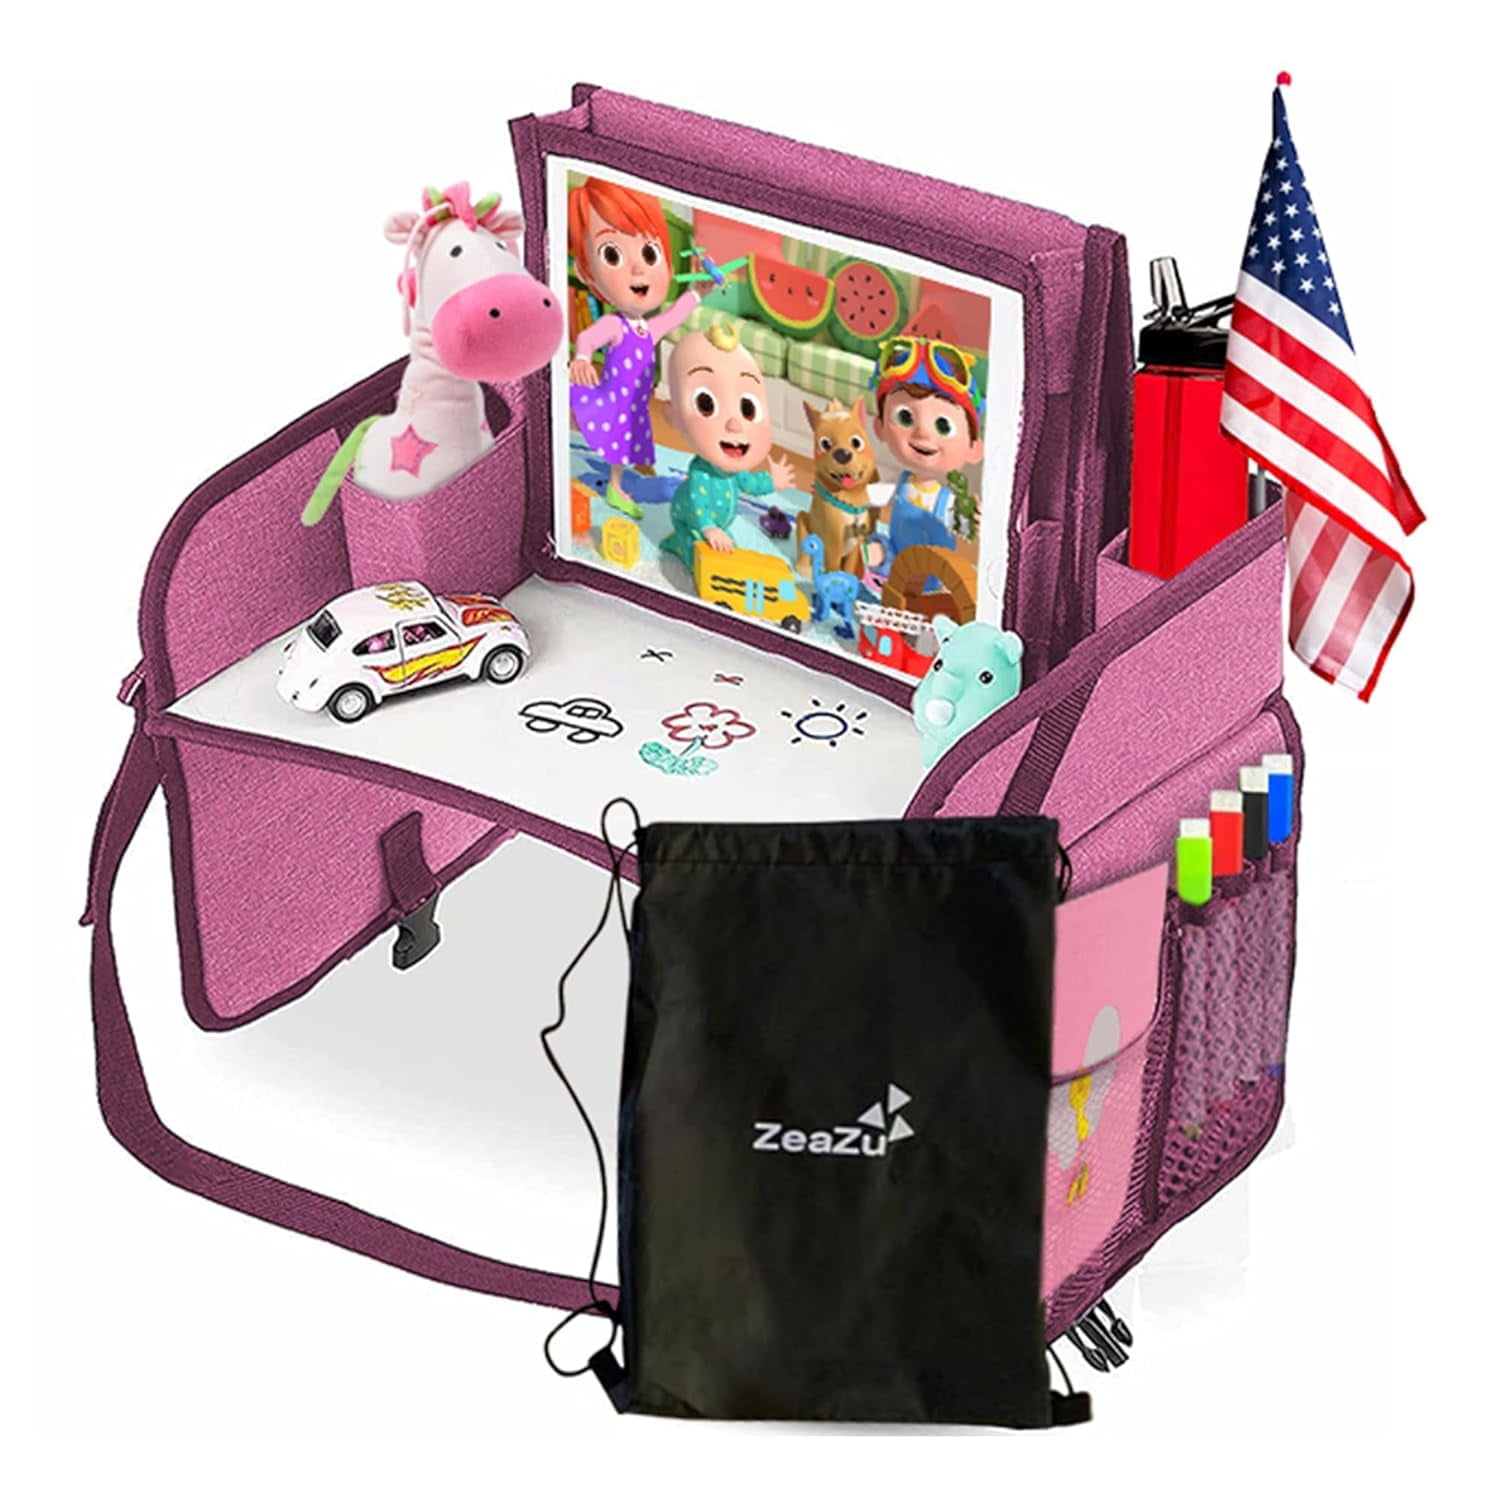 Lusso Gear, Kids Travel Activity Tray, For Car, Airplane, Booster Seat, Dry Erase Board, Displays Tablet, Storage Pockets